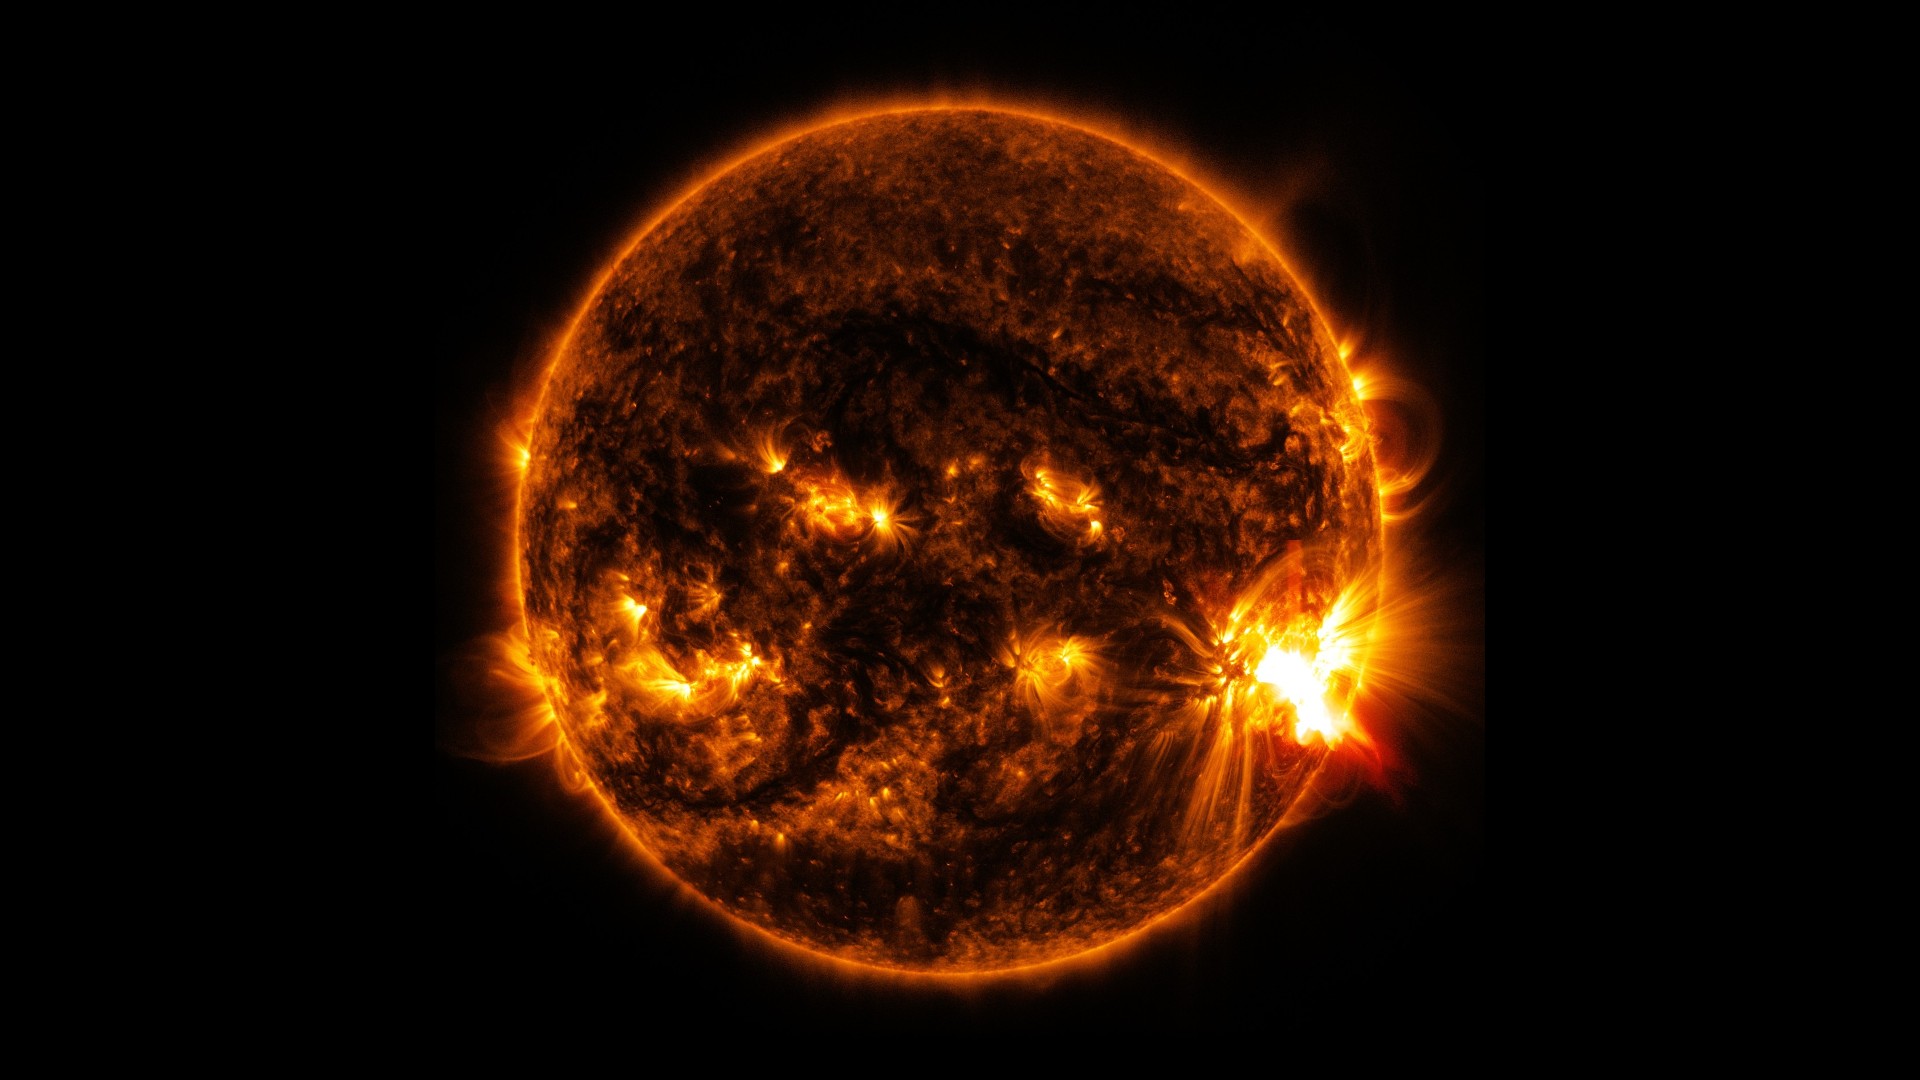 NASA's Solar Dynamics Observatory captured this image of an X2.0-class solar flare bursting off the lower right side of the sun on Oct. 27, 2014. The image shows a blend of extreme ultraviolet light with wavelengths of 131 and 171 Angstroms.